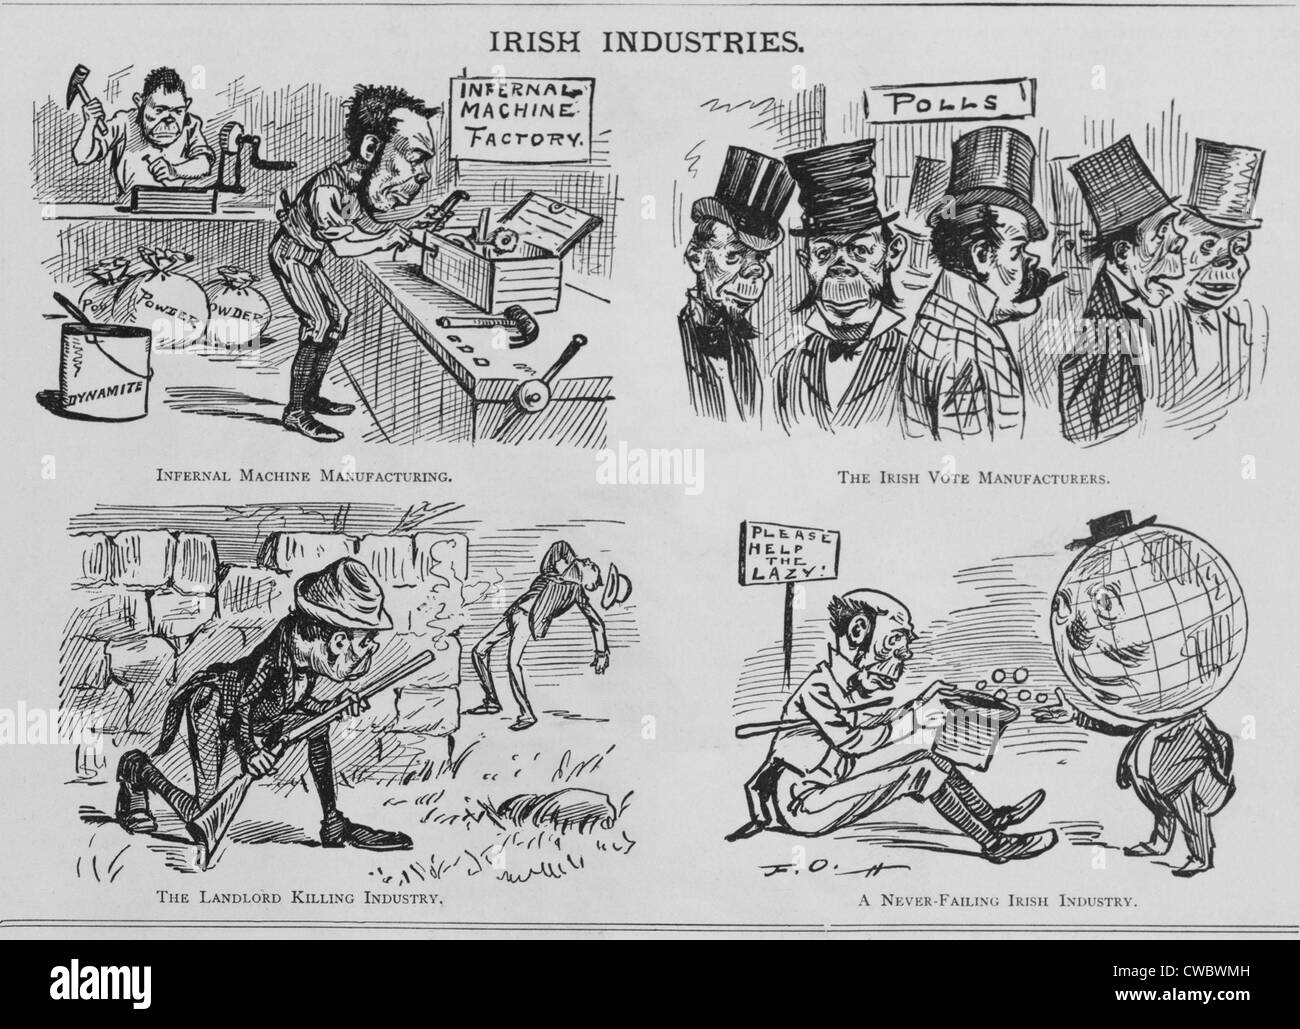 An Anti-Irish cartoon entitled IRISH INDUSTRIES, appeared in the American humor magazine PUCK in November 1881. Drawn by master Stock Photo